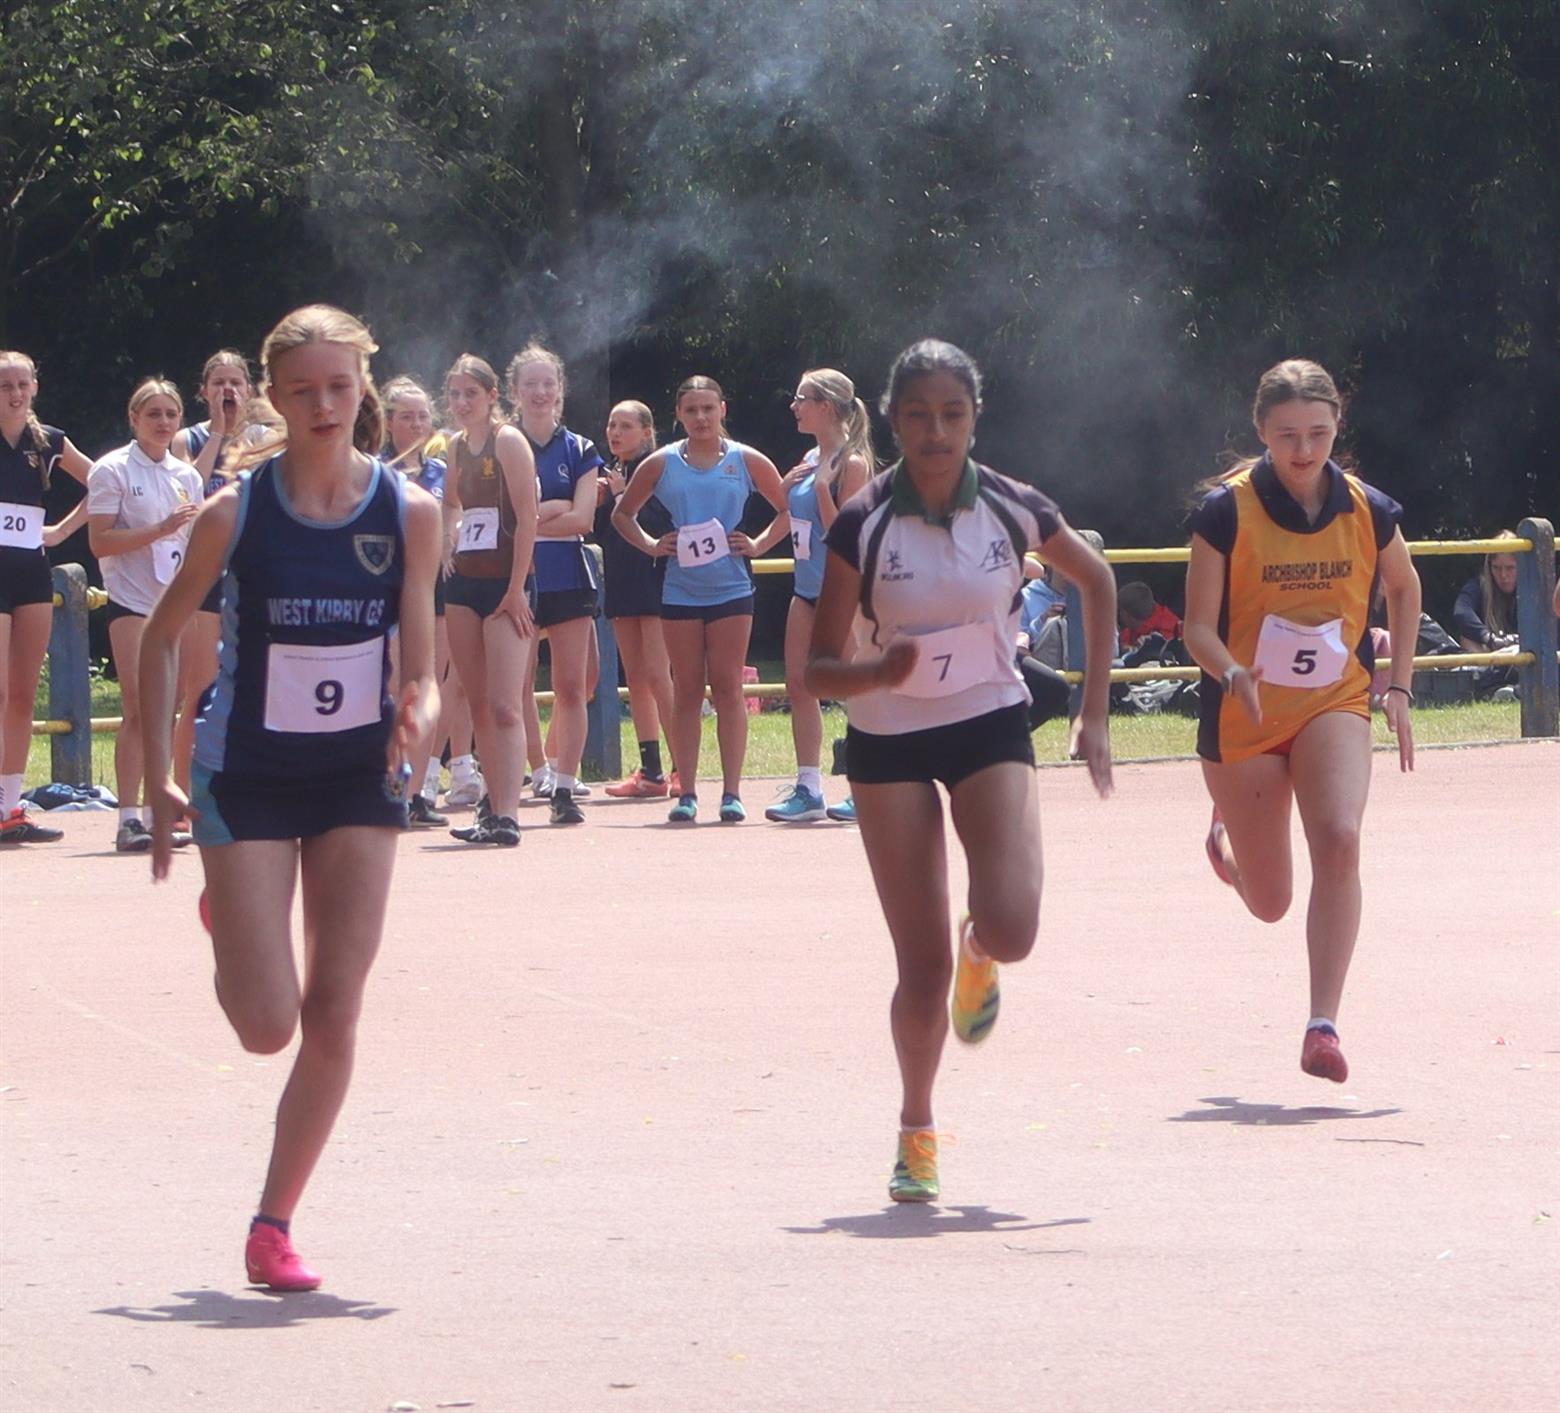 Athletics records tumble again as AKS girls finish as one of top 6 NW schools